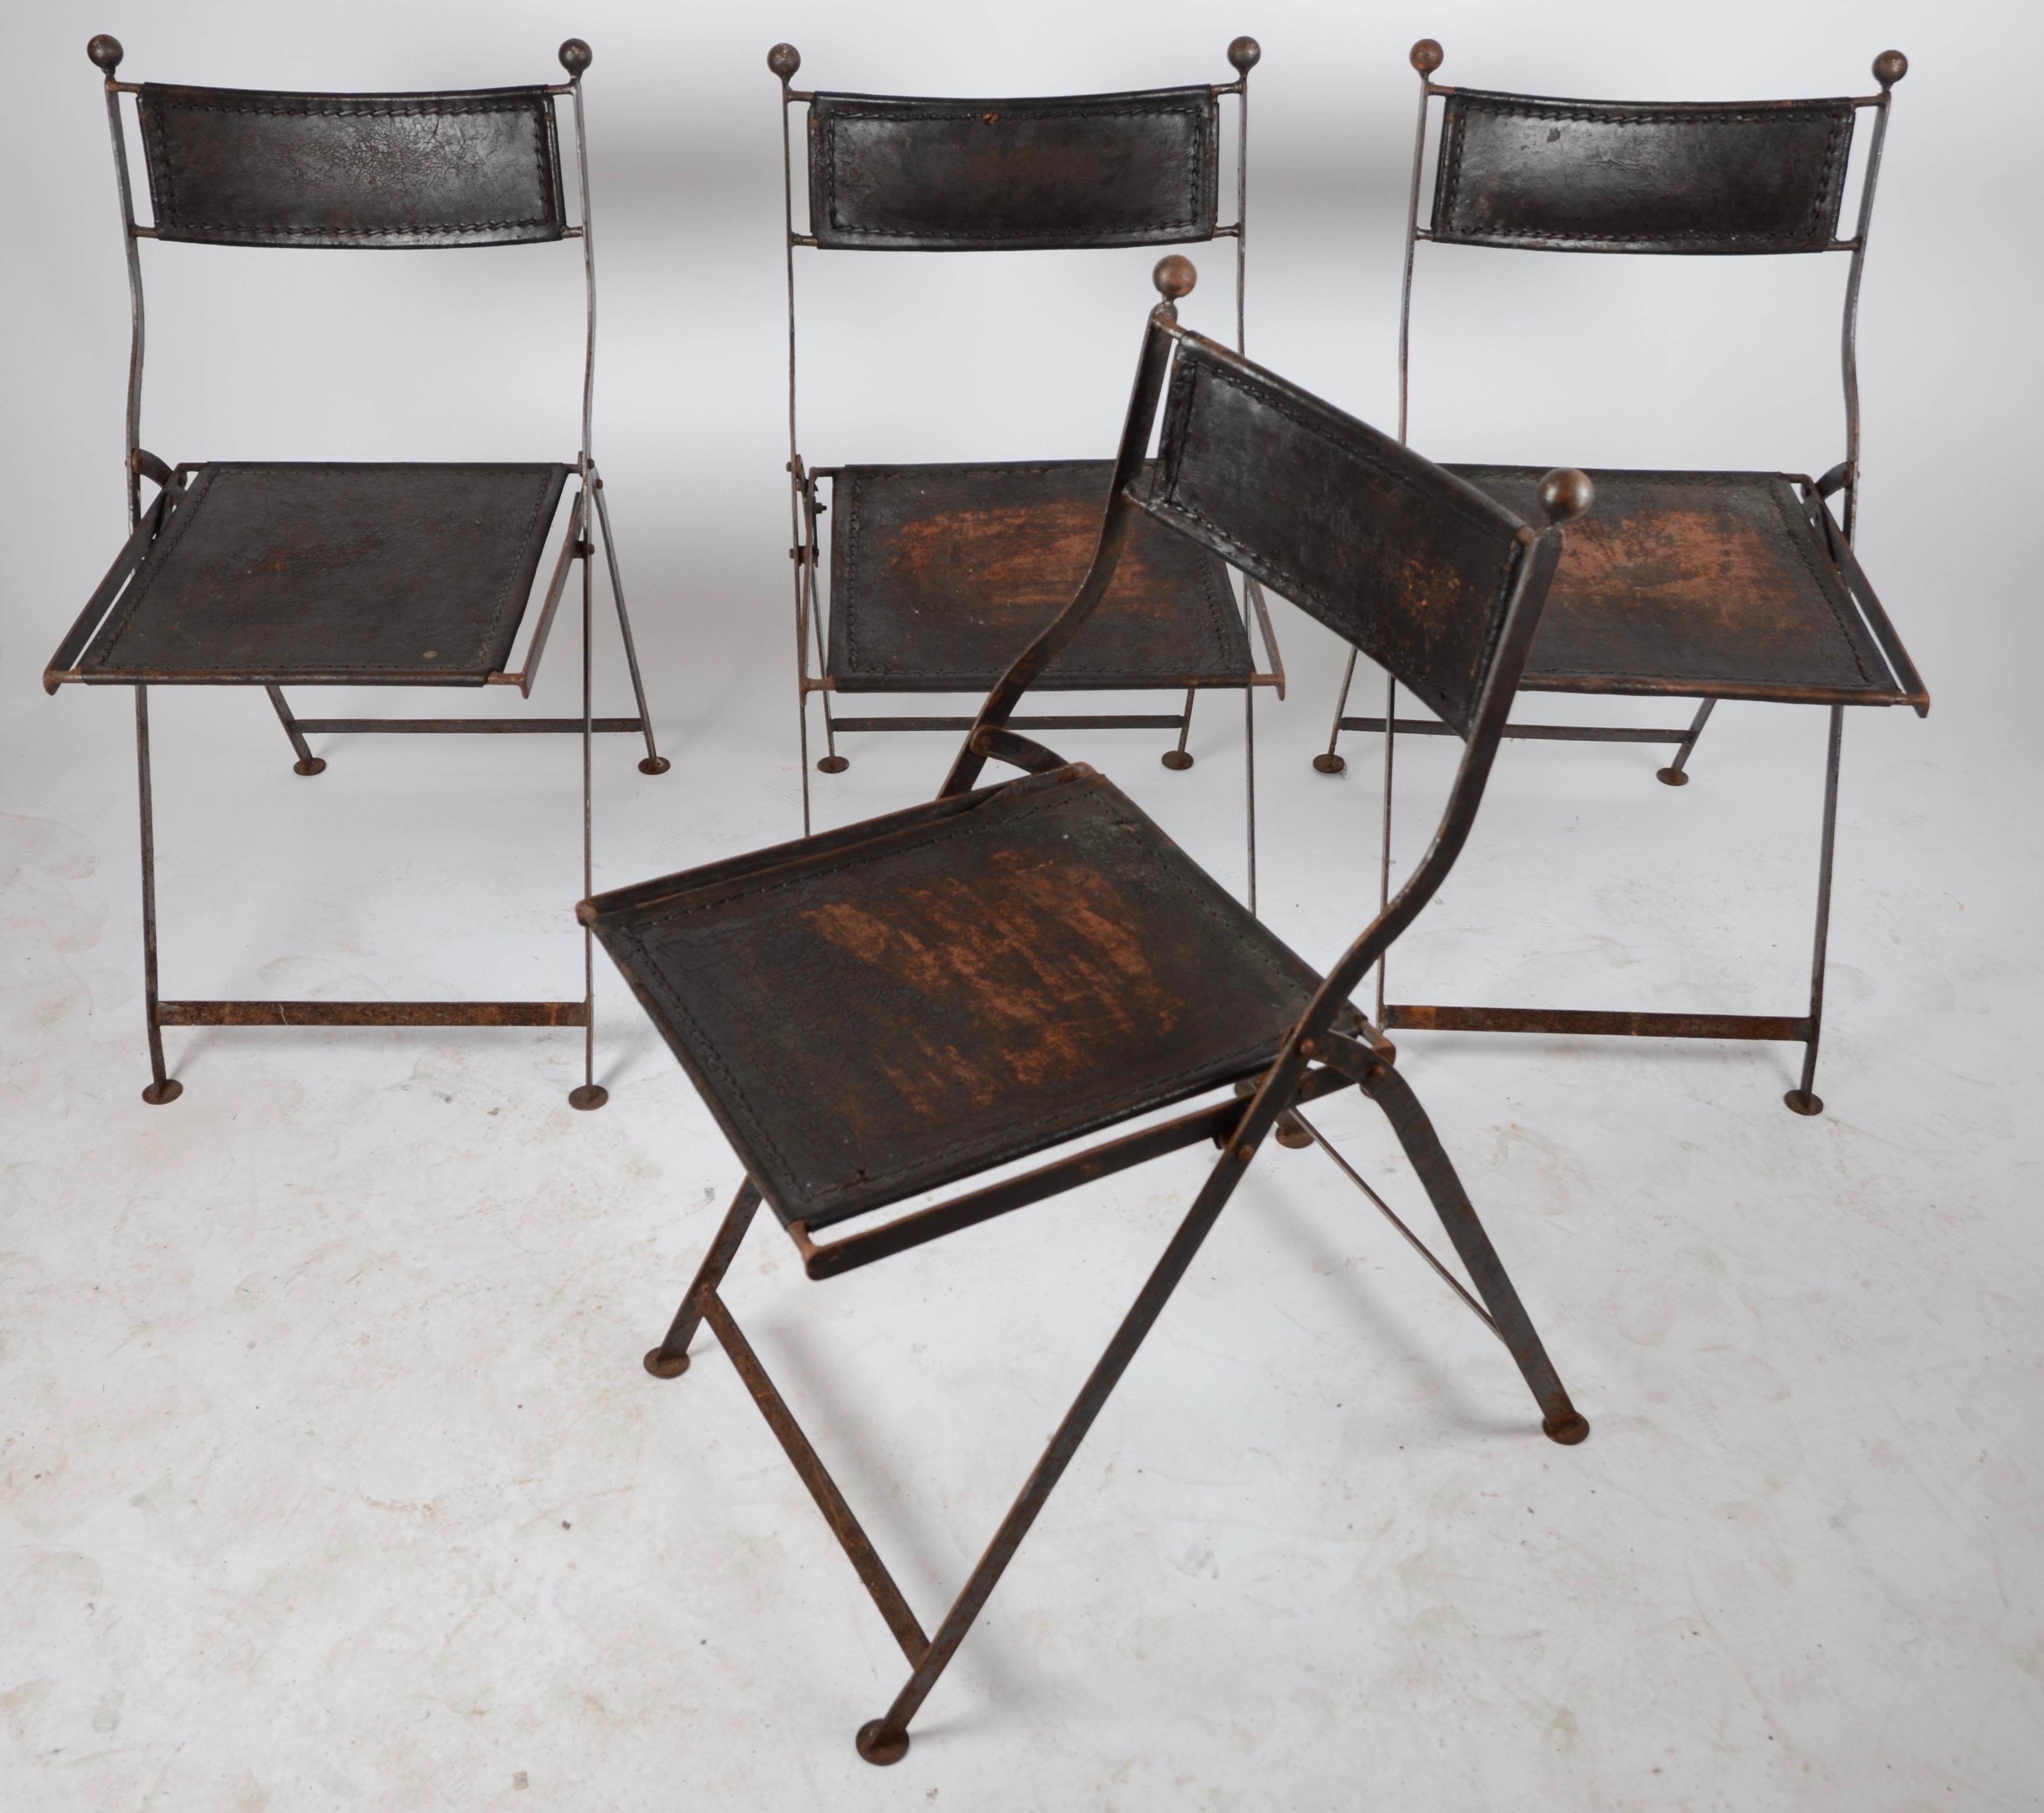 Rustic Folding Chairs, Leather, France, 1920s-1930s